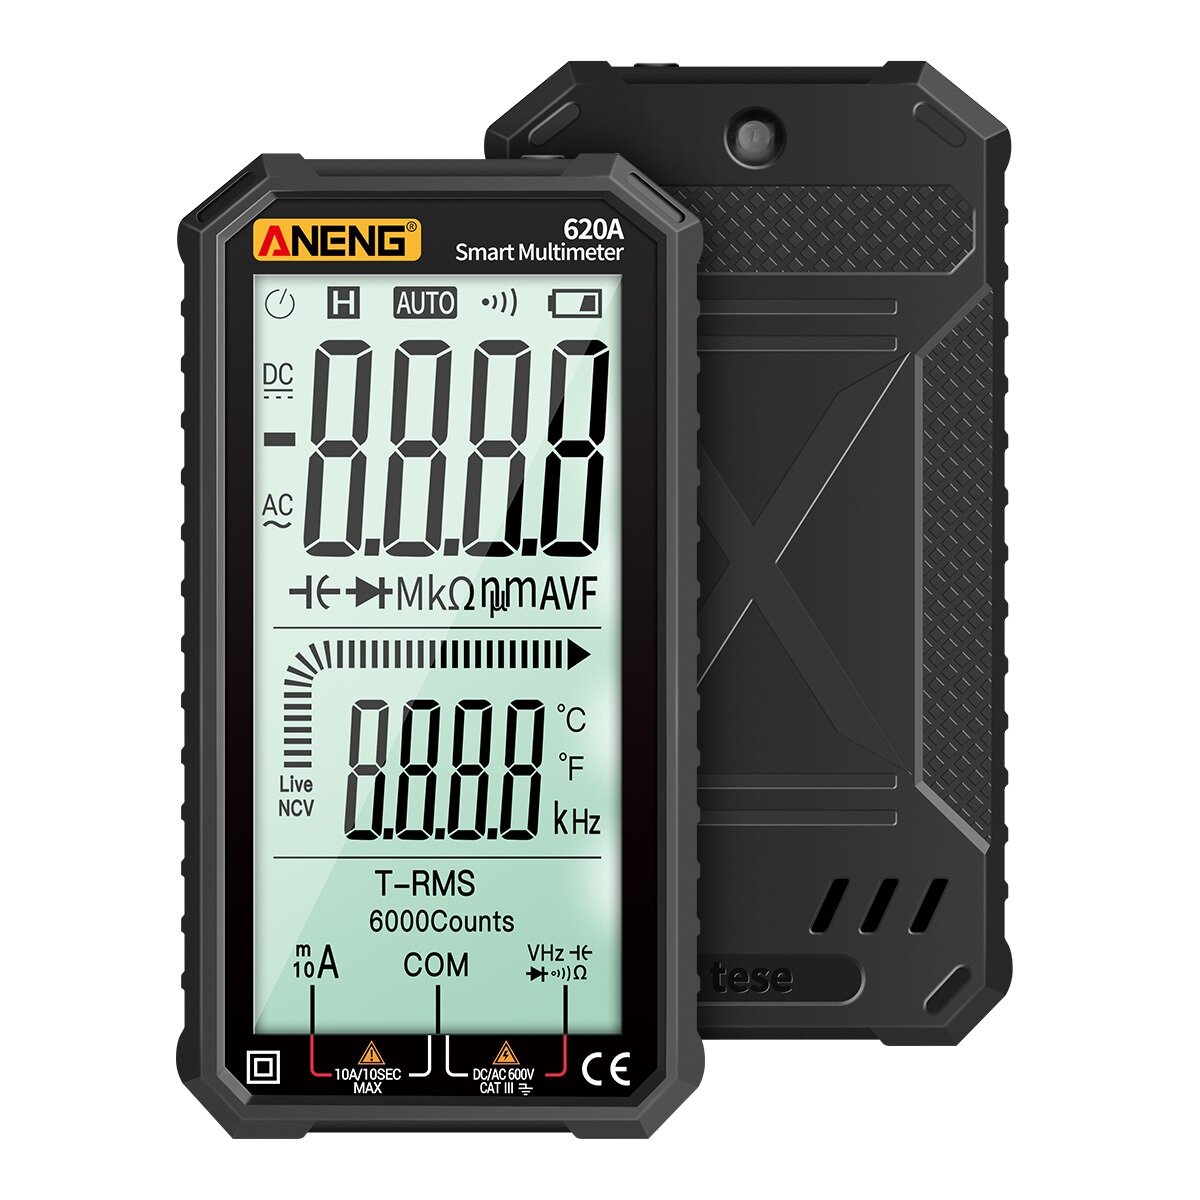 ANENG 620A 4.7-inch Large LCD Screen Automatic + Manual Intelligent True RMS Digital Multimeter Resistance Diode Capacit